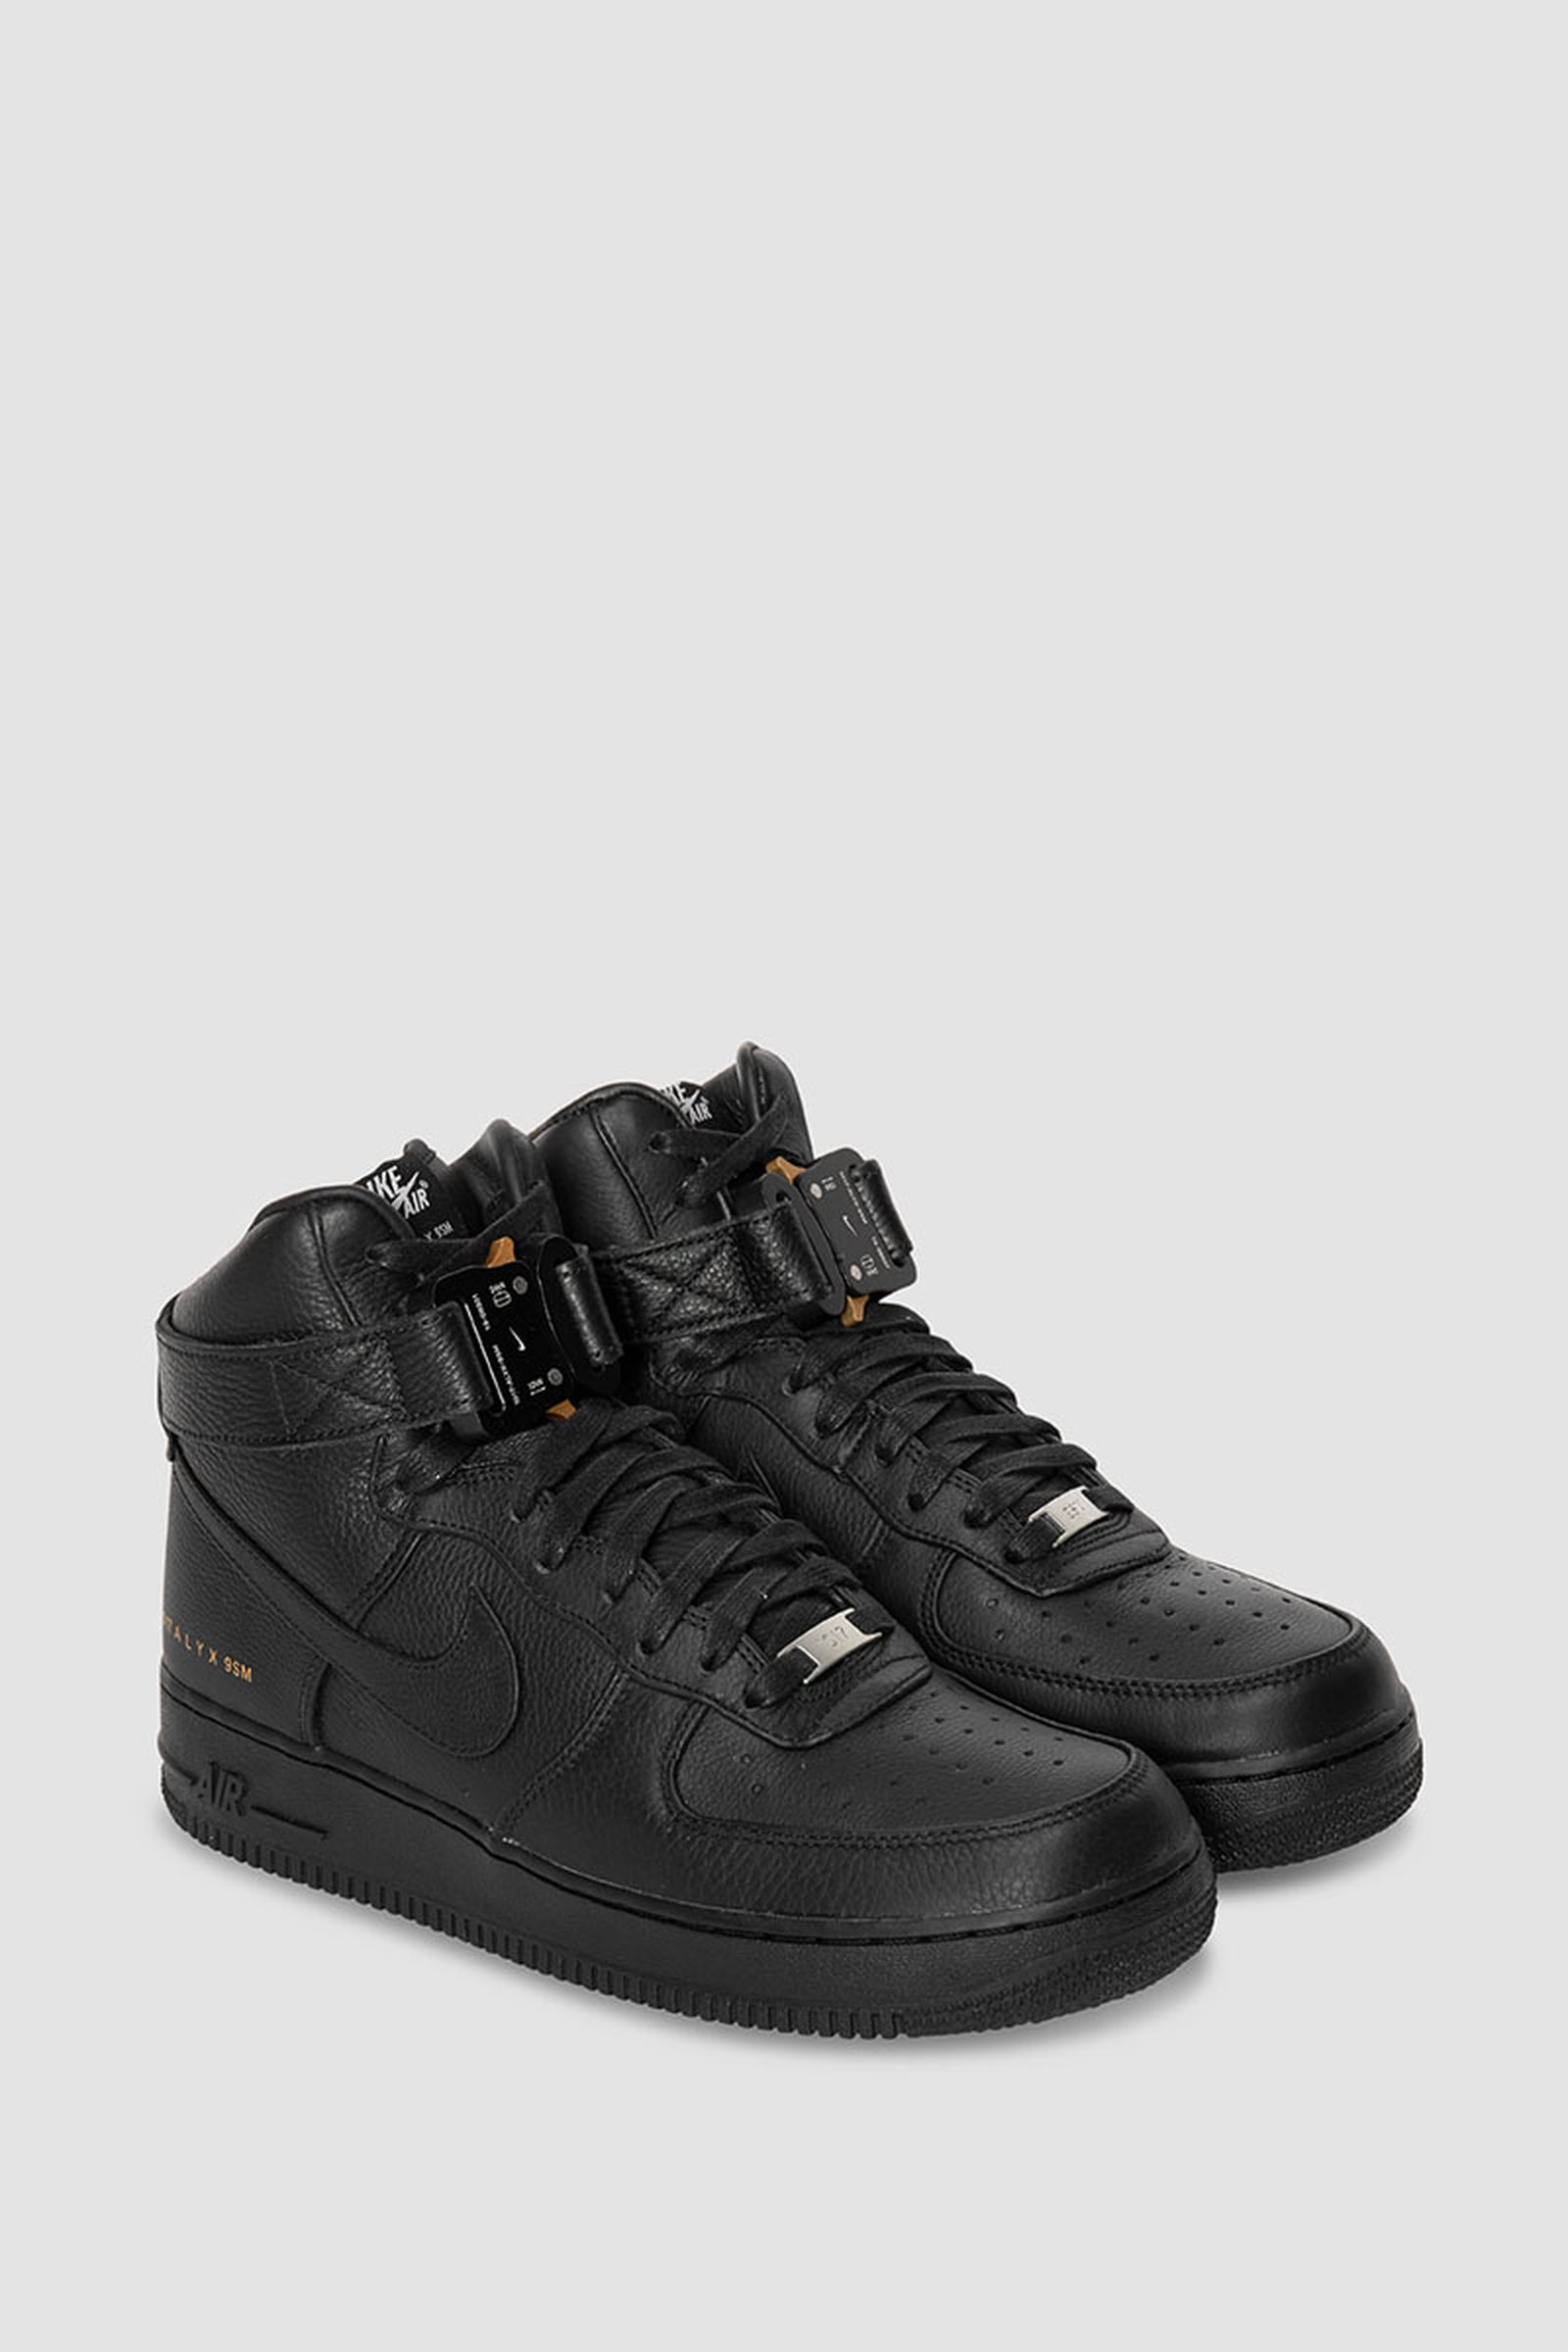 alyx-nike-air-force-1-high-release-date-price-13